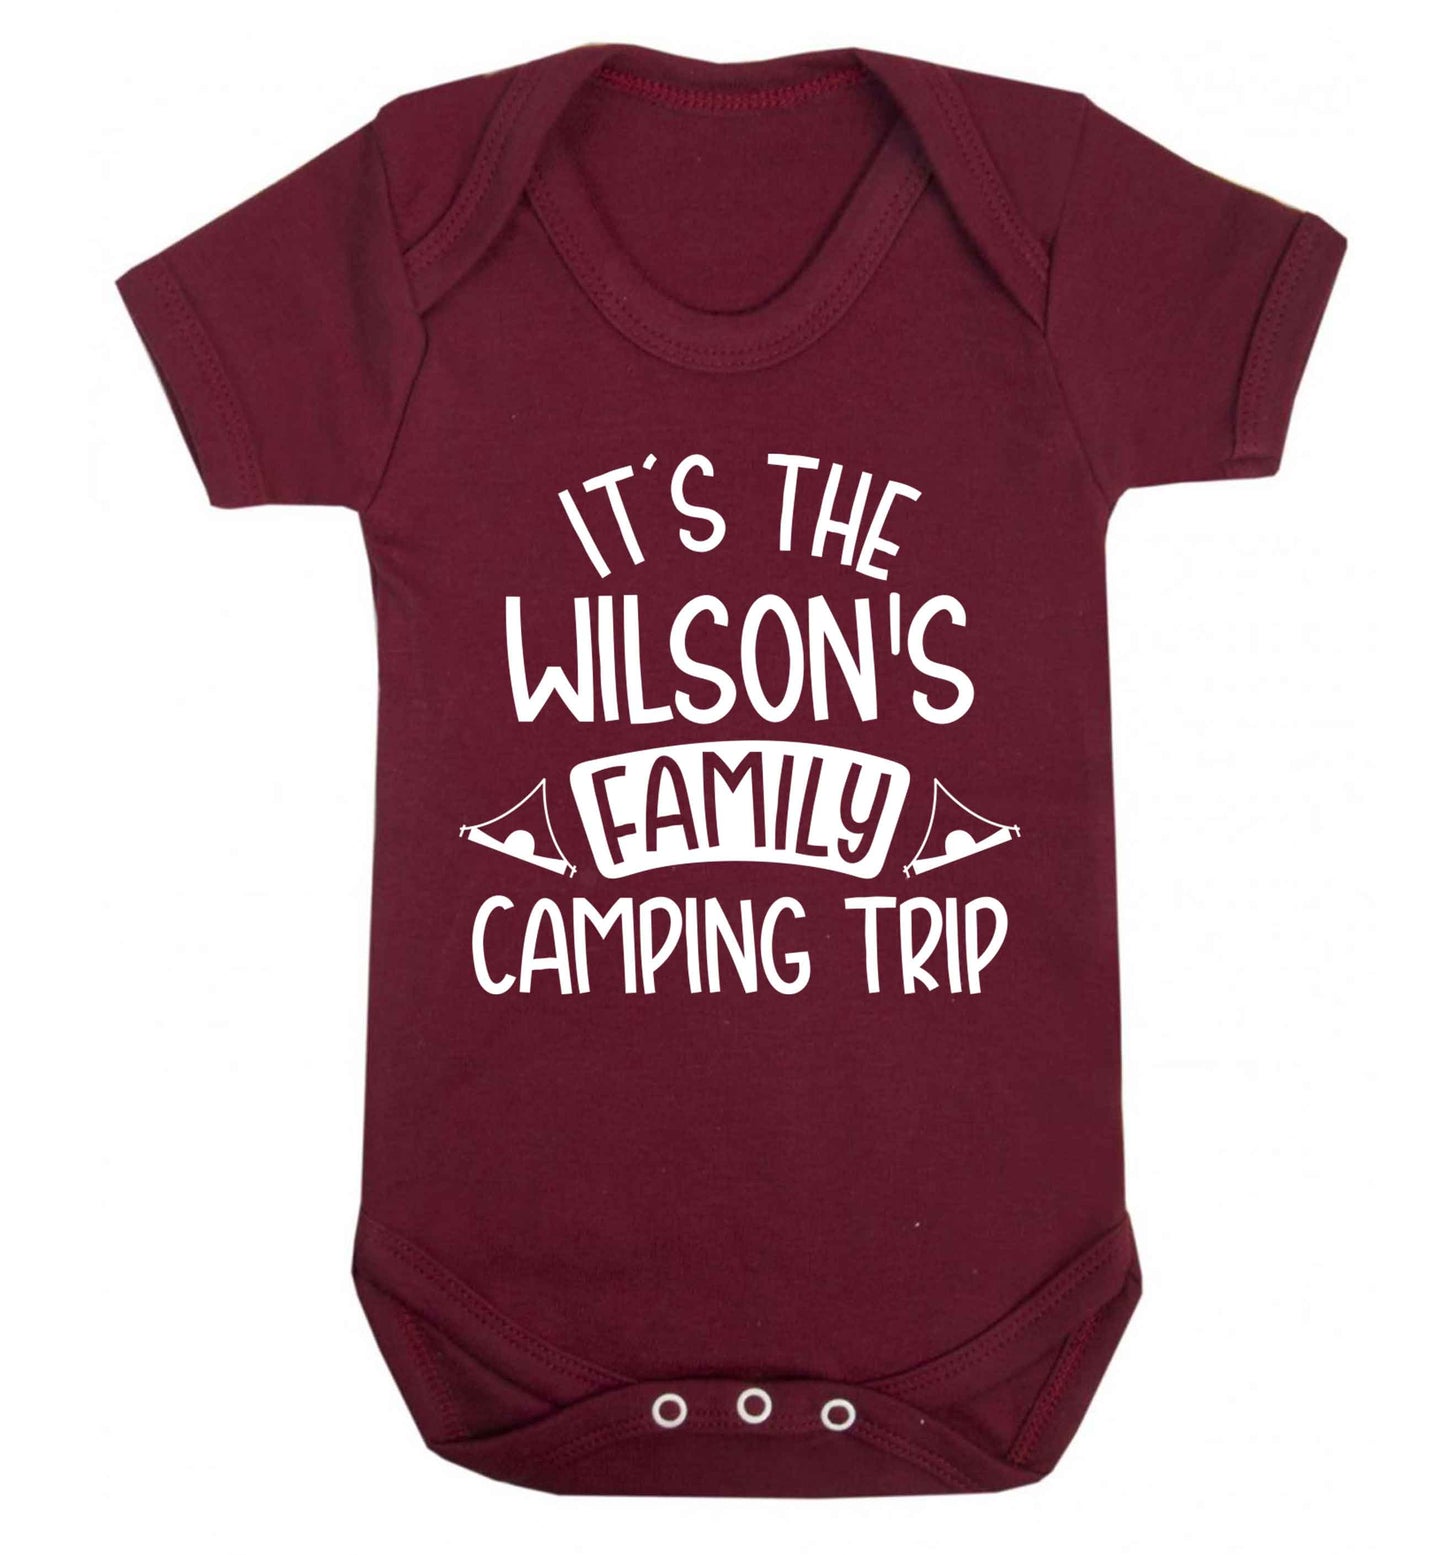 It's the Wilson's family camping trip personalised Baby Vest maroon 18-24 months